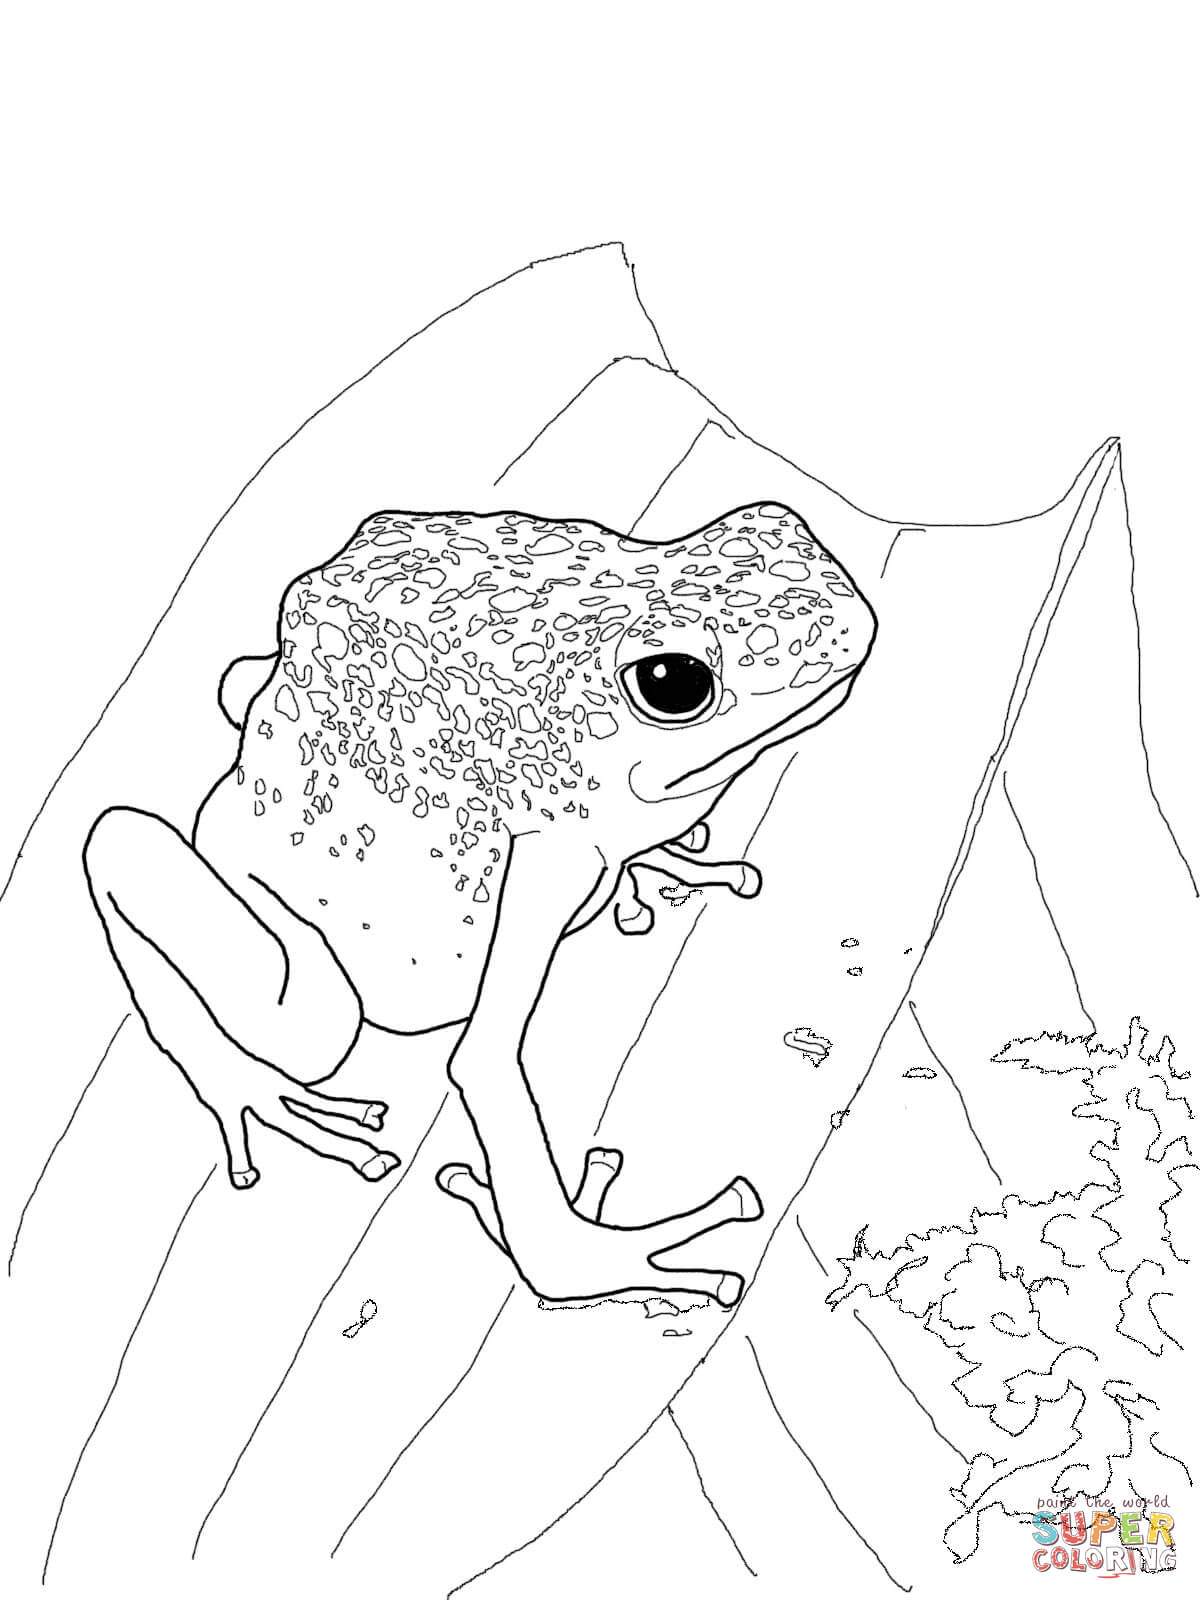 Poison Dart Frog coloring #10, Download drawings